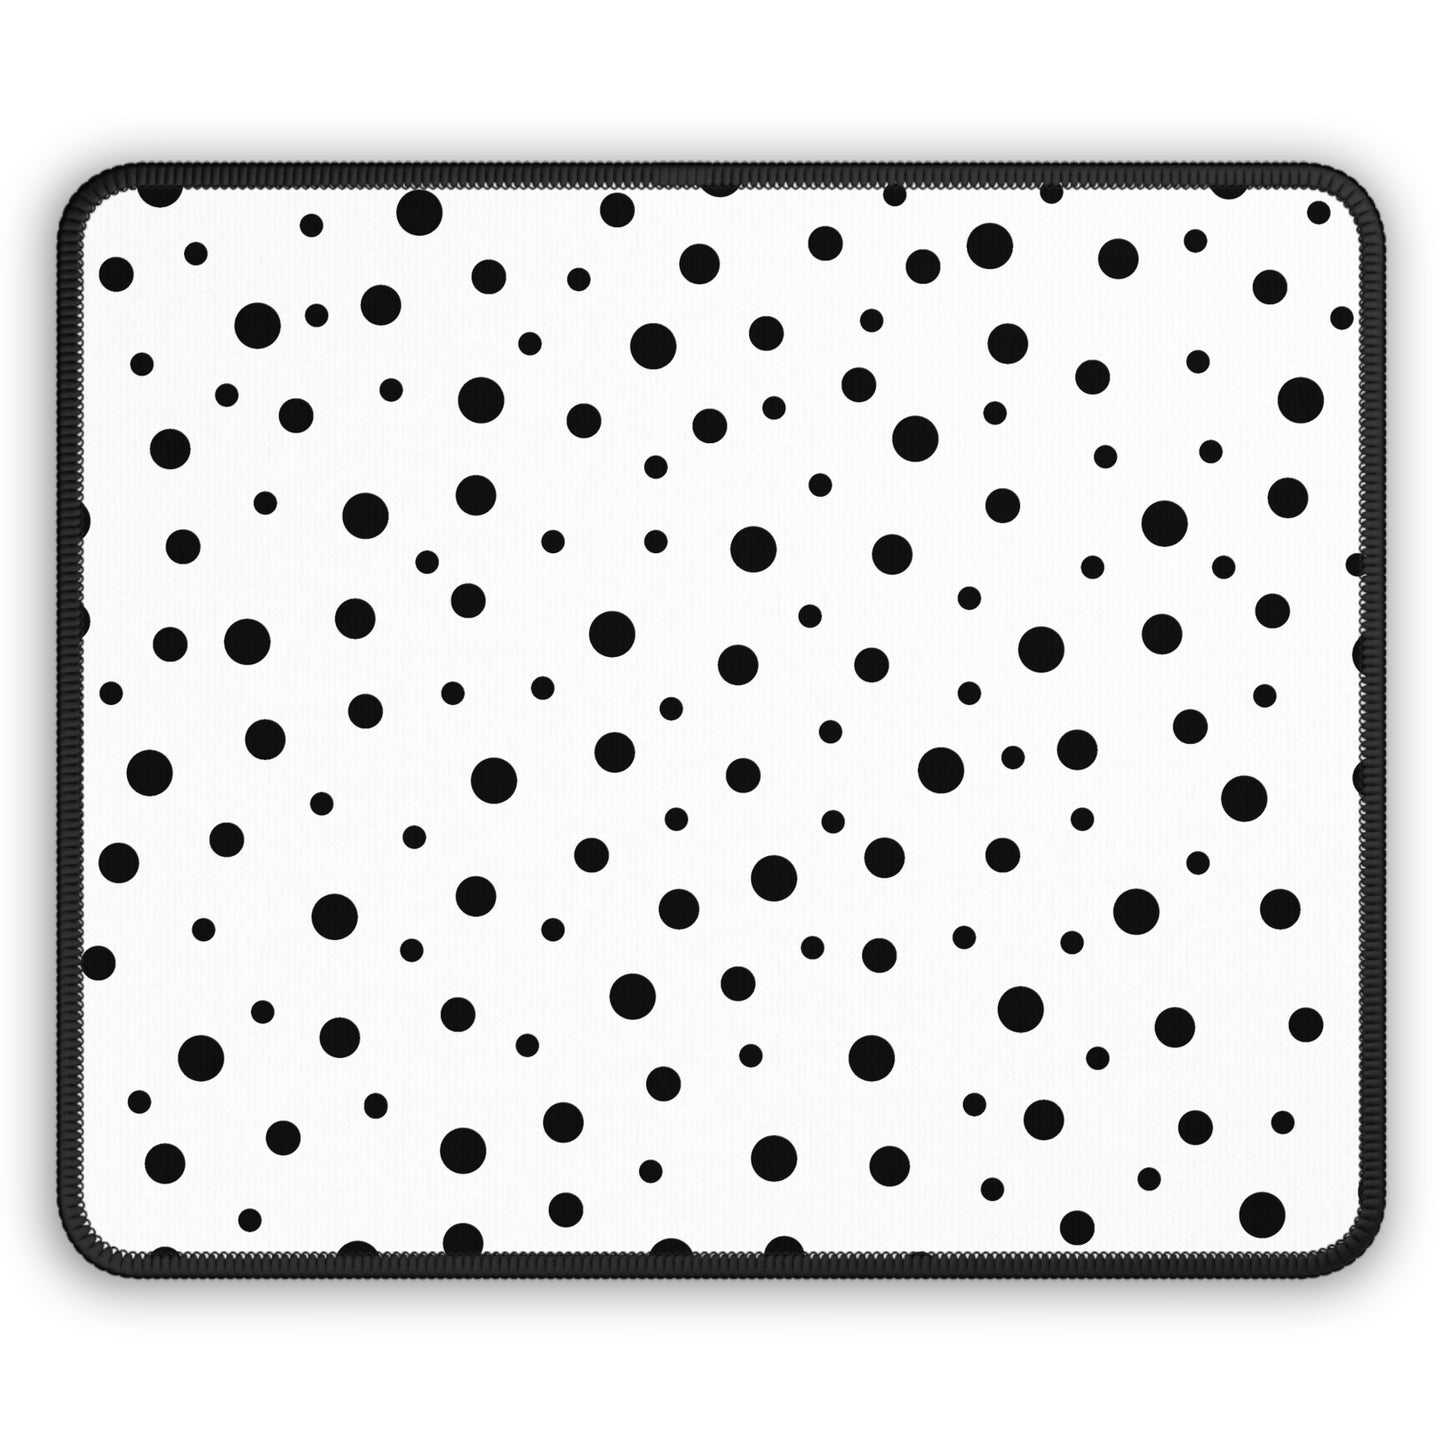 Black Dots & White Gaming Mouse Pad - Desk Cookies